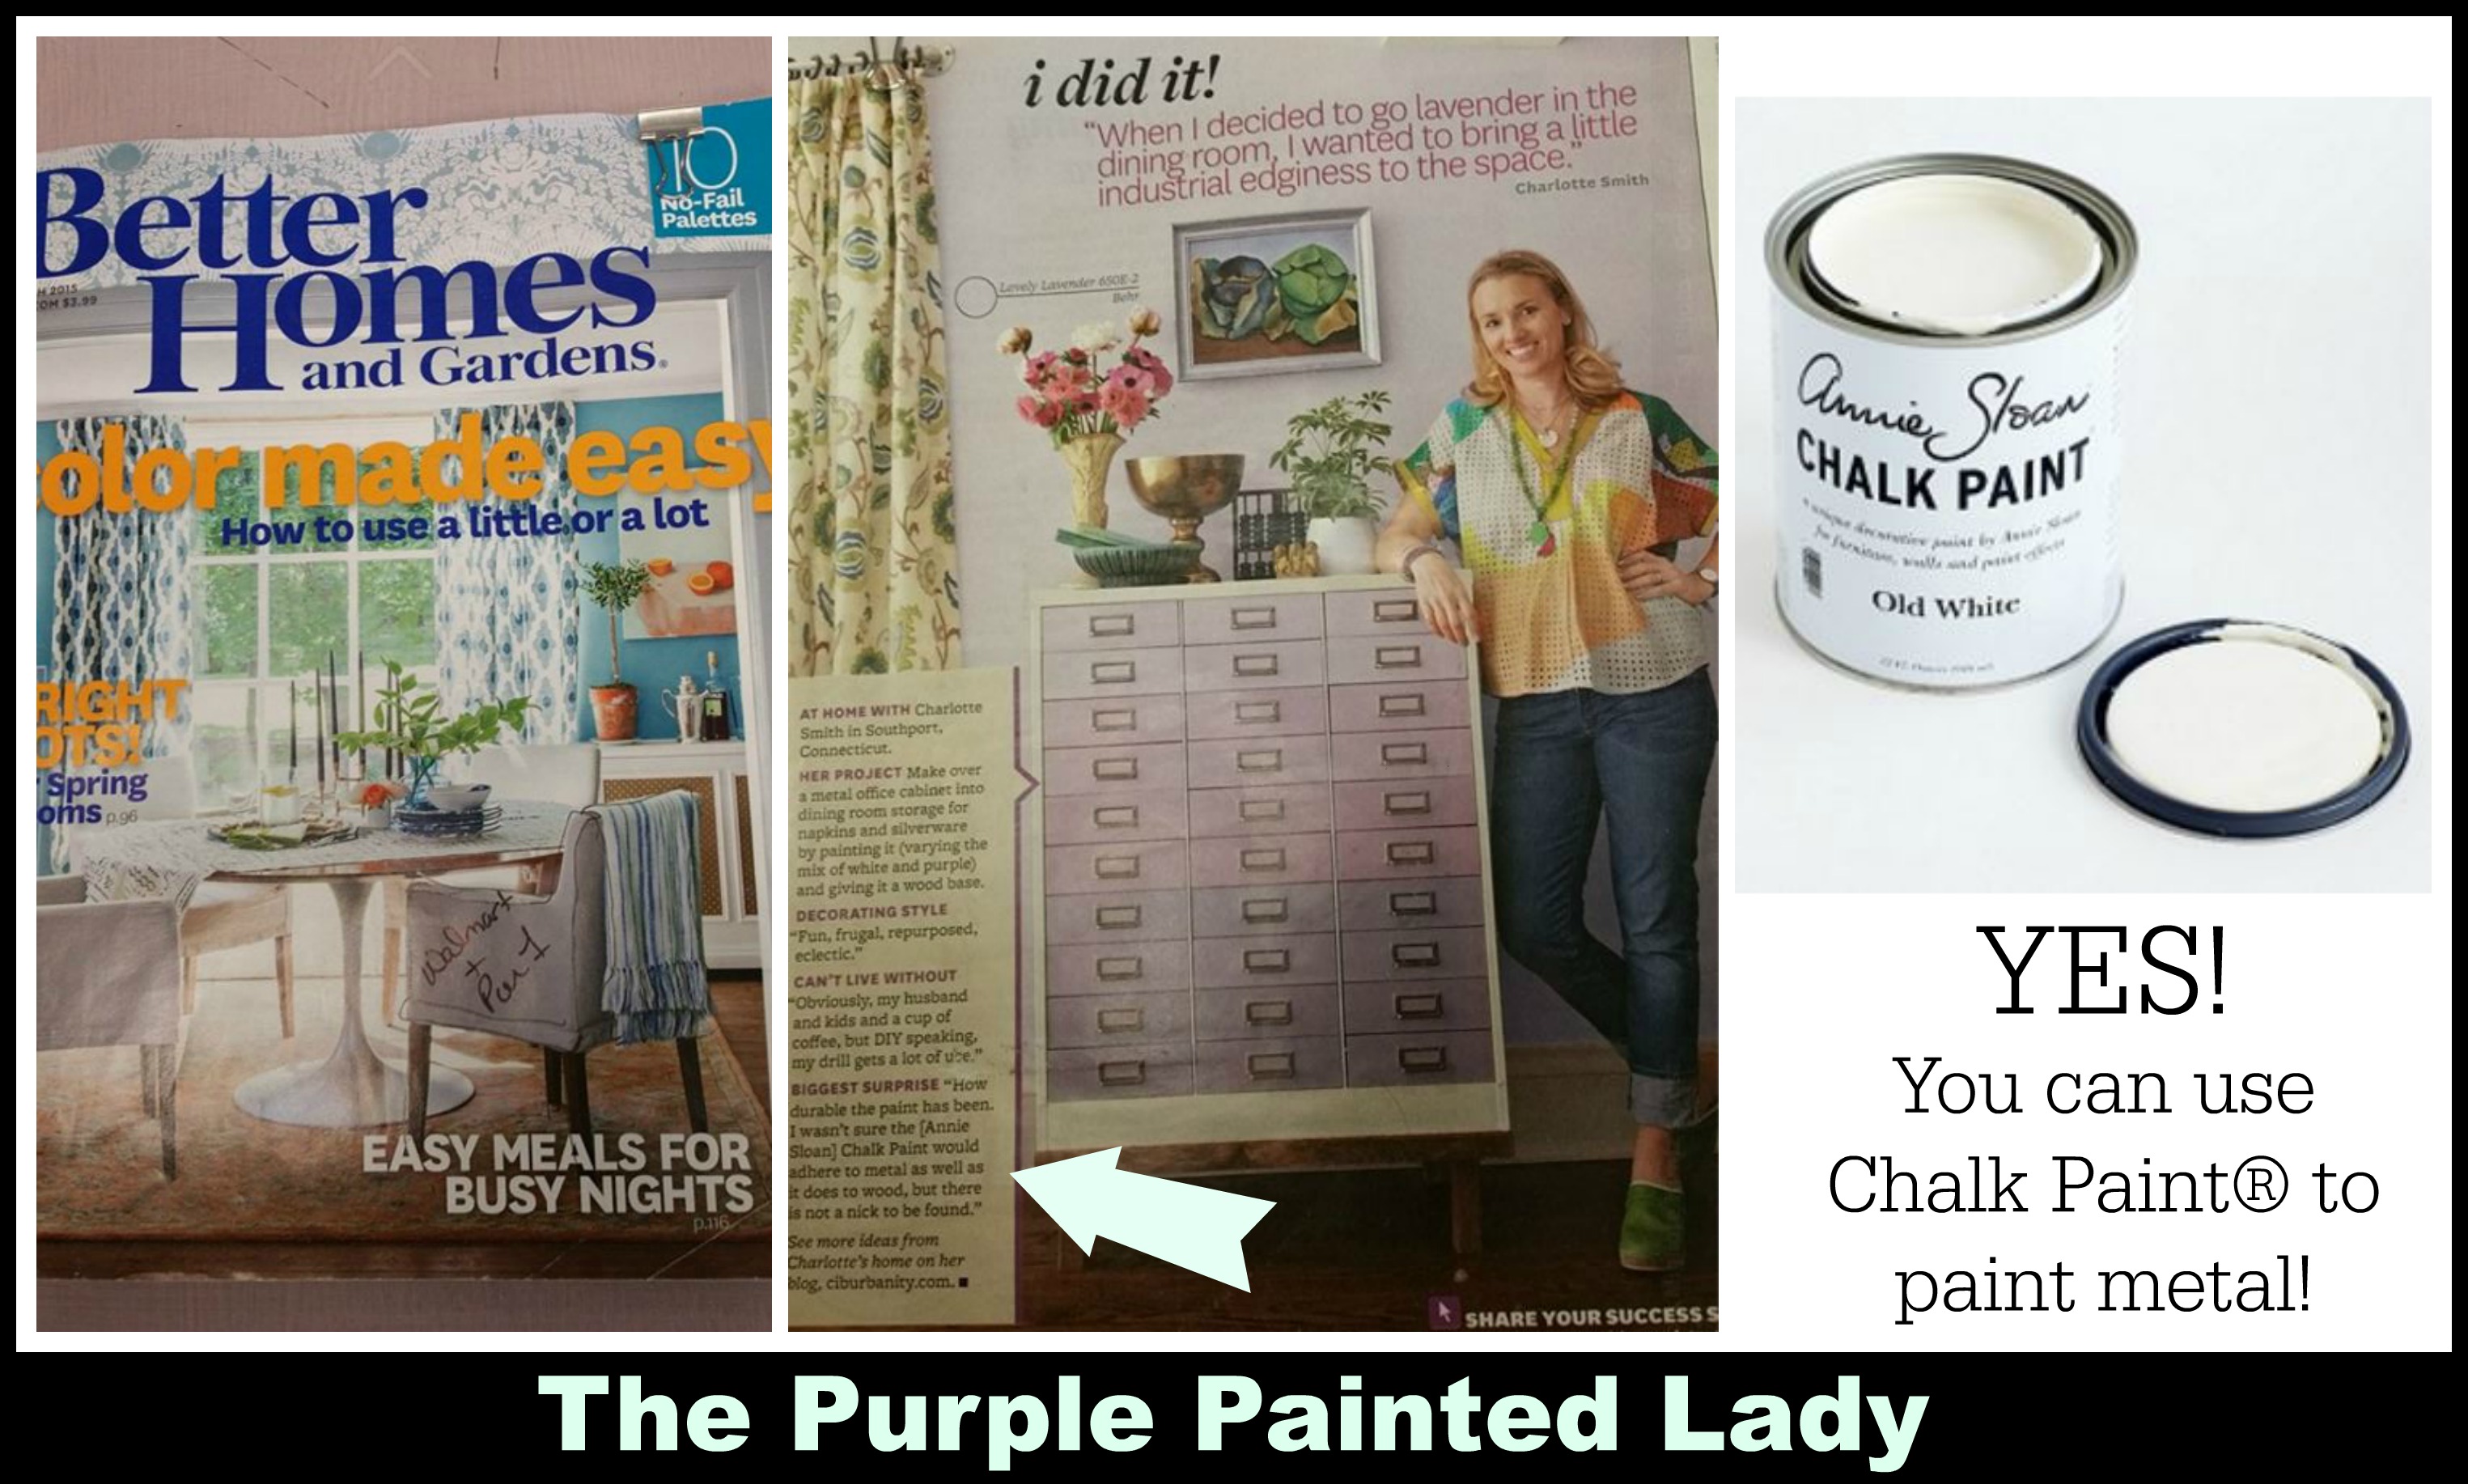 The Purple Painted Lady Painting Metal Chalk Paint Better Homes and Gardens